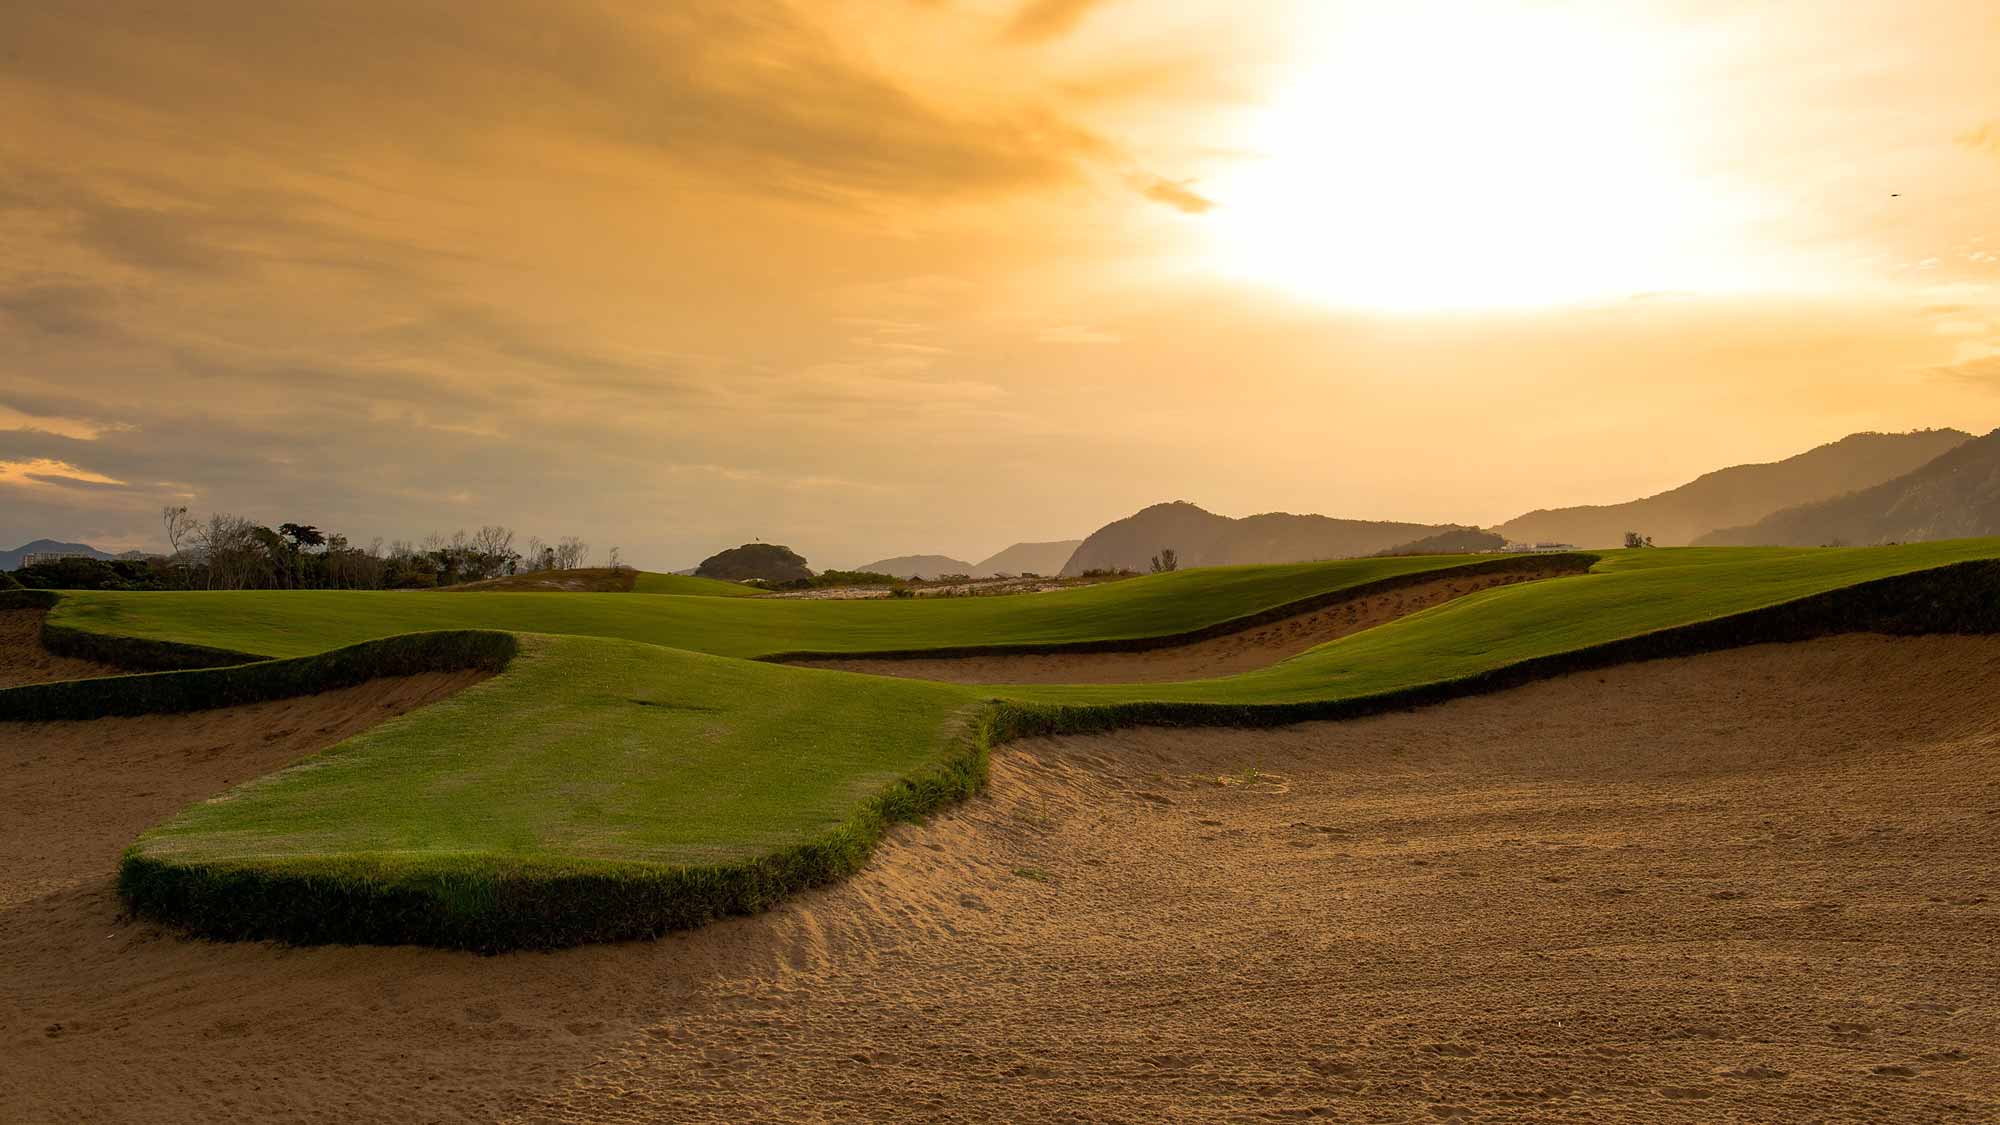 General view of the golf course for the Rio 2016 Olympic Games in the Barra da Tijuca neighborhood on July 6, 2015 in Rio de Janeiro, Brazil